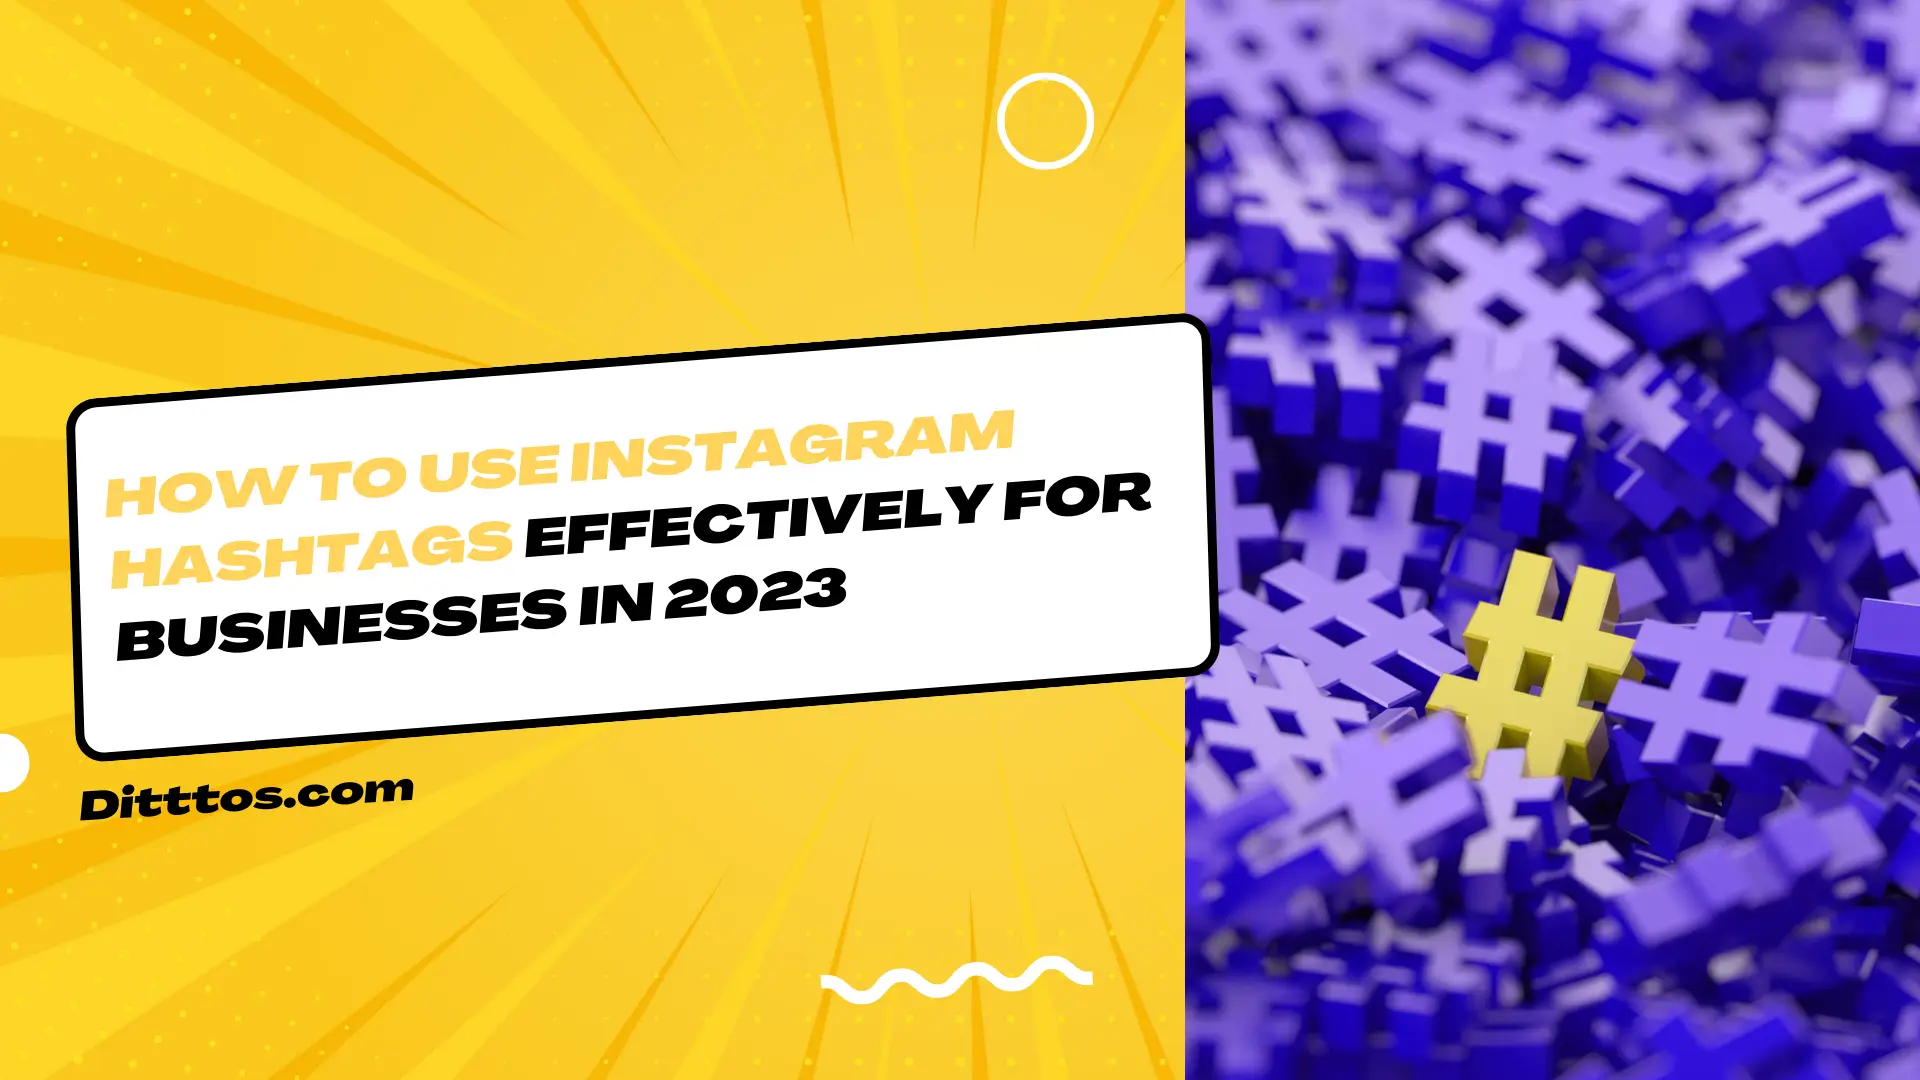 How to Use Instagram Hashtags Effectively for Businesses in 2023